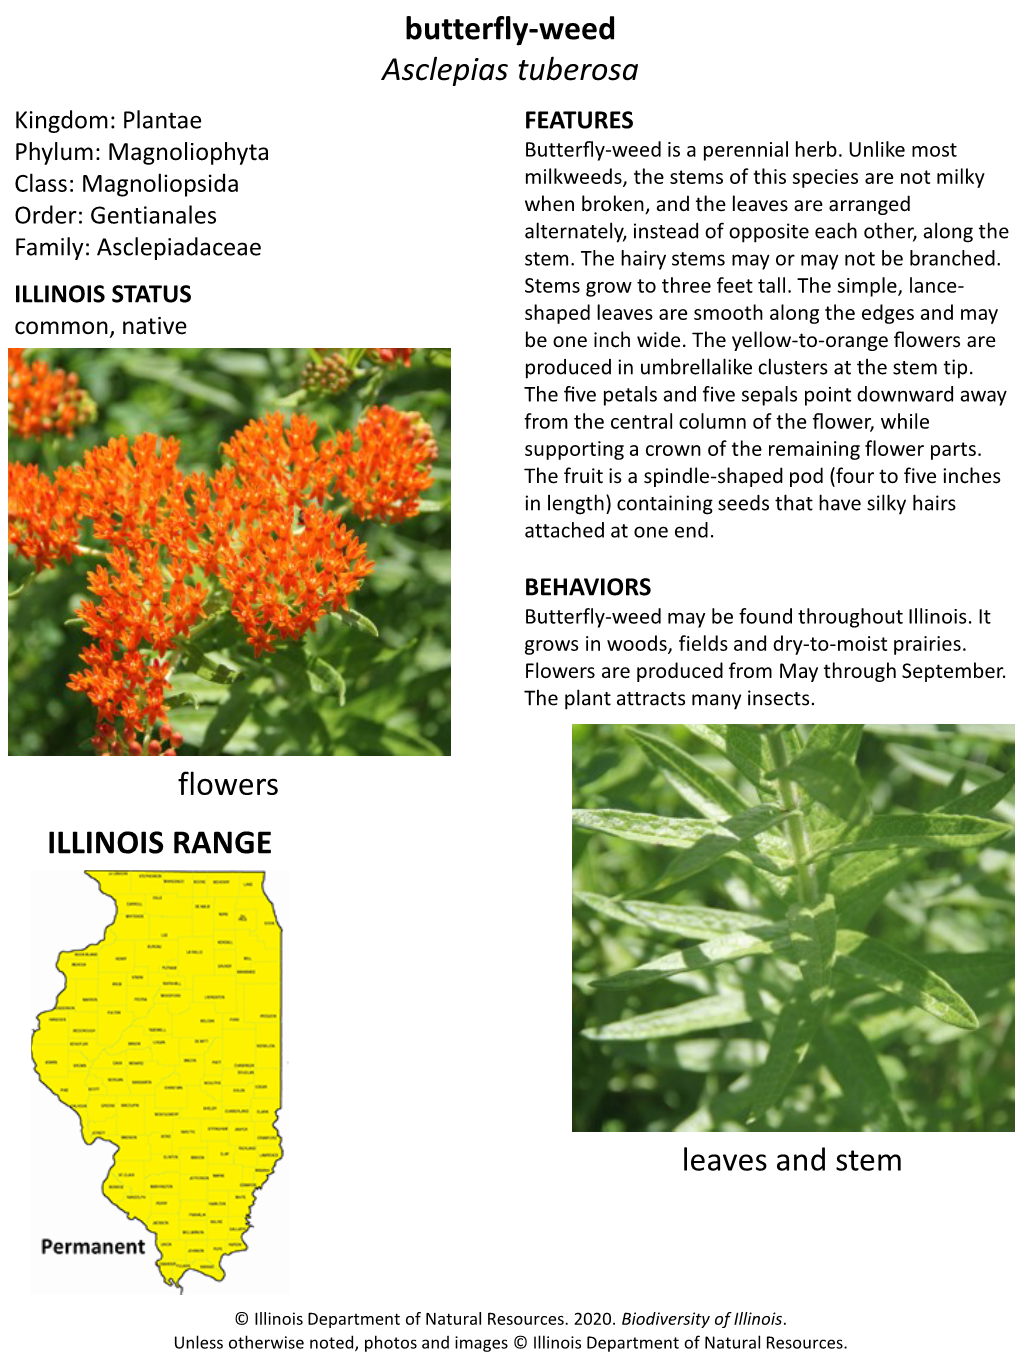 Butterfly-Weed Asclepias Tuberosa Flowers Leaves and Stem ILLINOIS